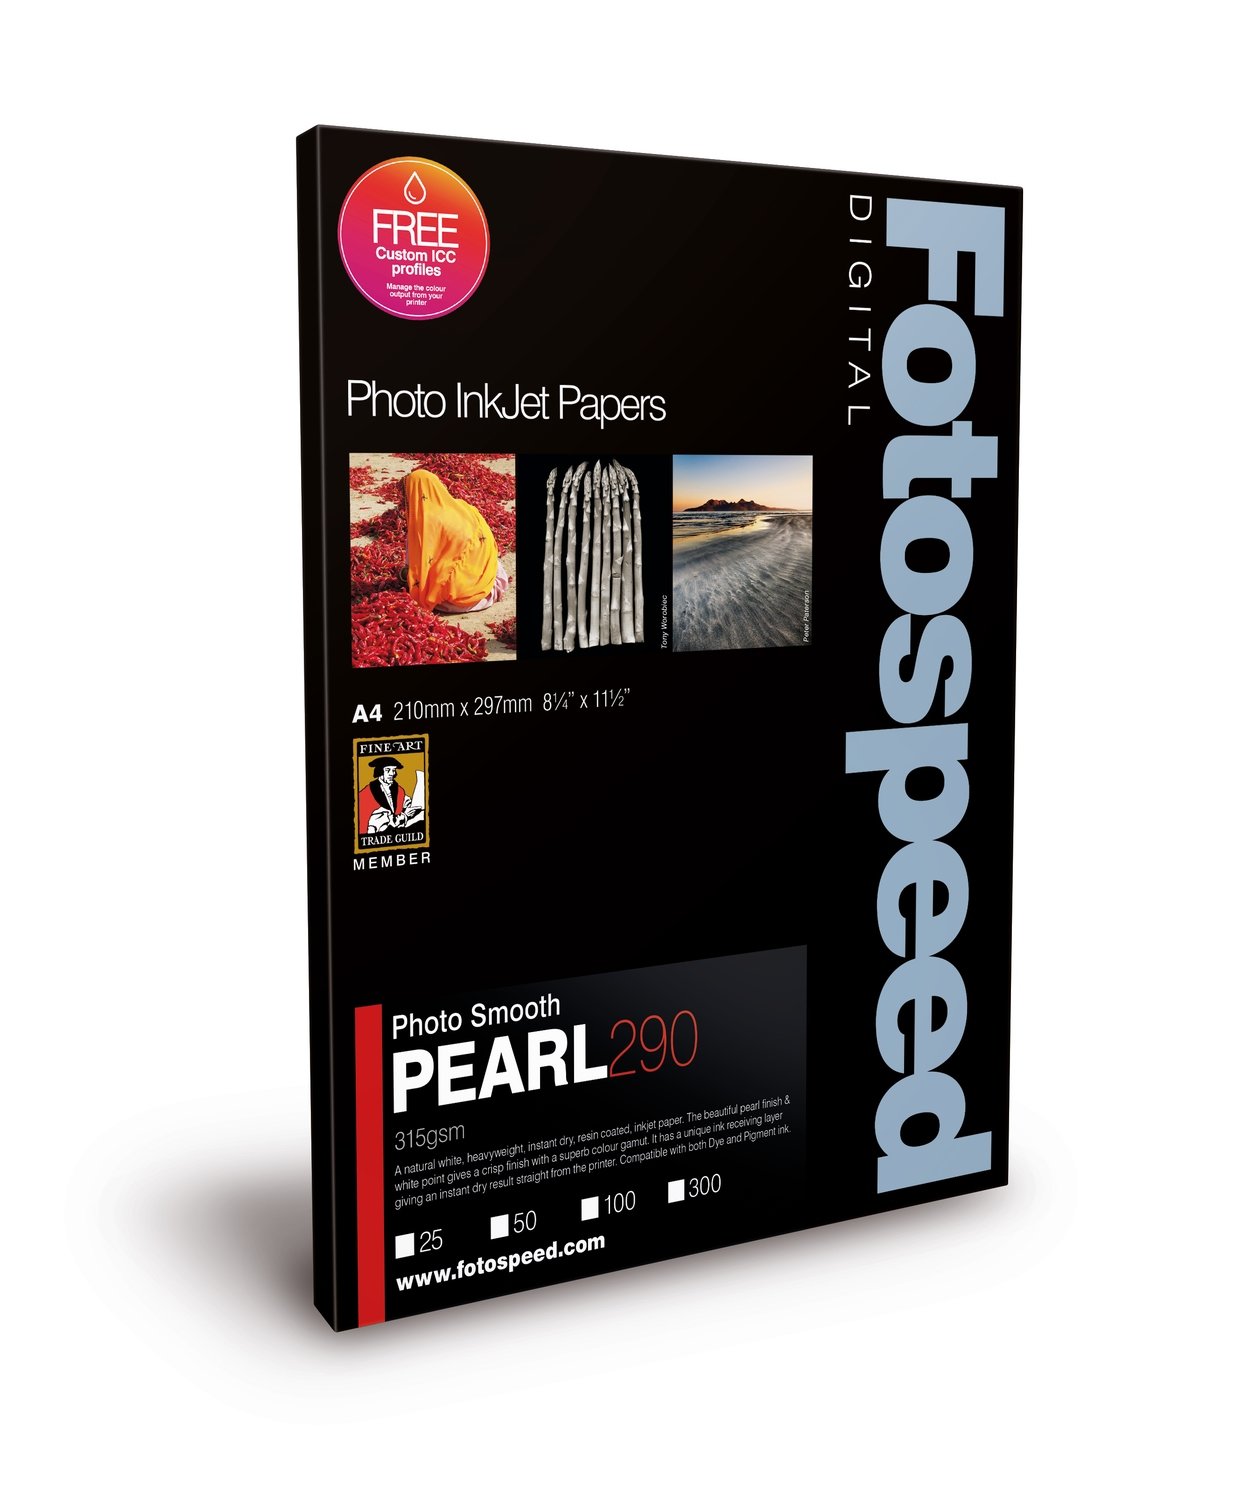 Fotospeed Photo Smooth Pearl 290 (6x4